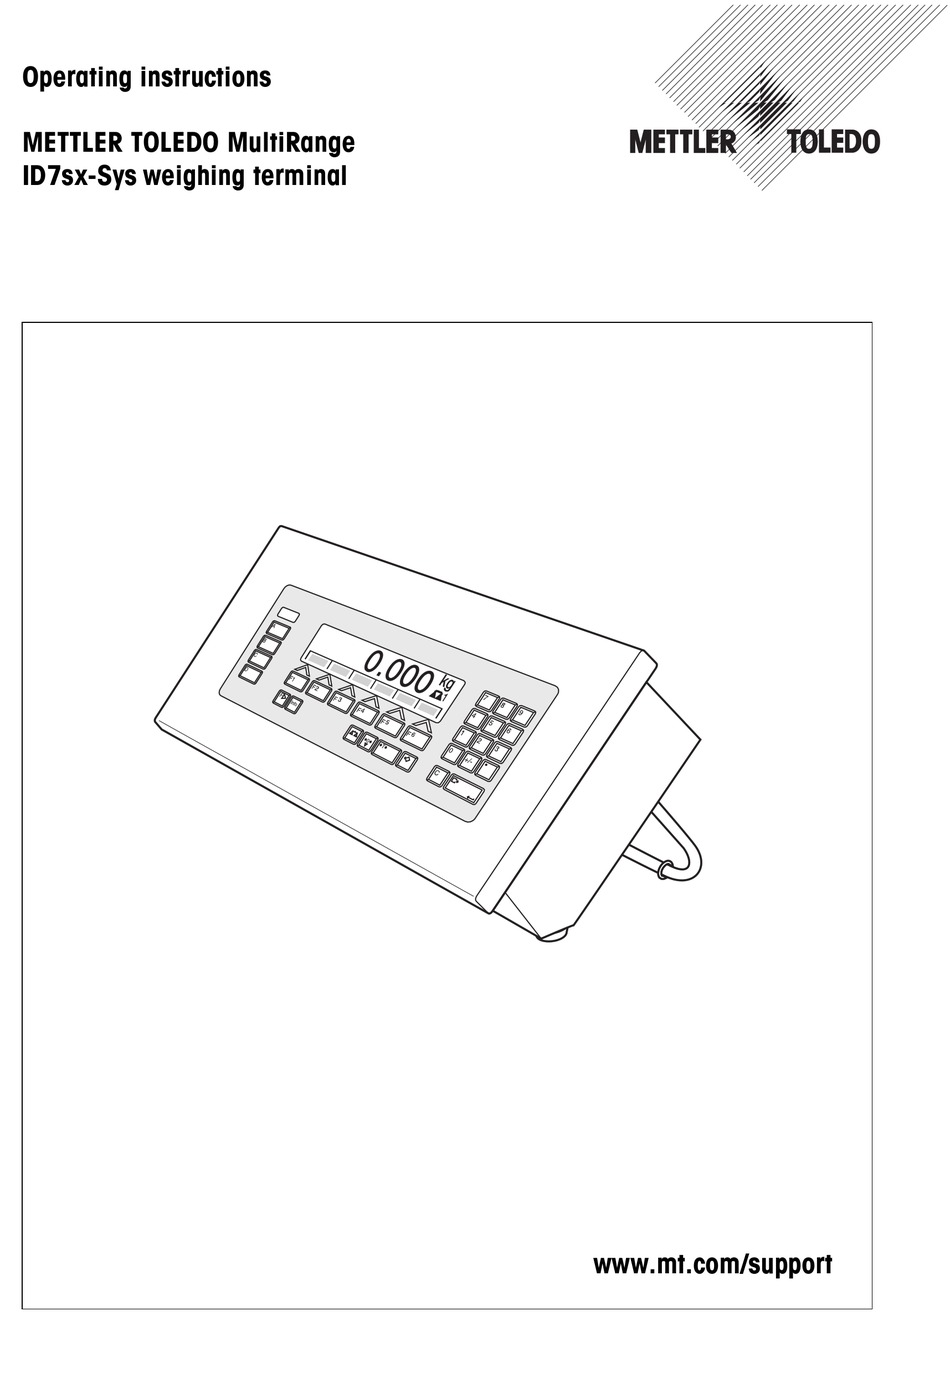 METTLER TOLEDO ID7SX-SYS OPERATING INSTRUCTIONS MANUAL Pdf Download